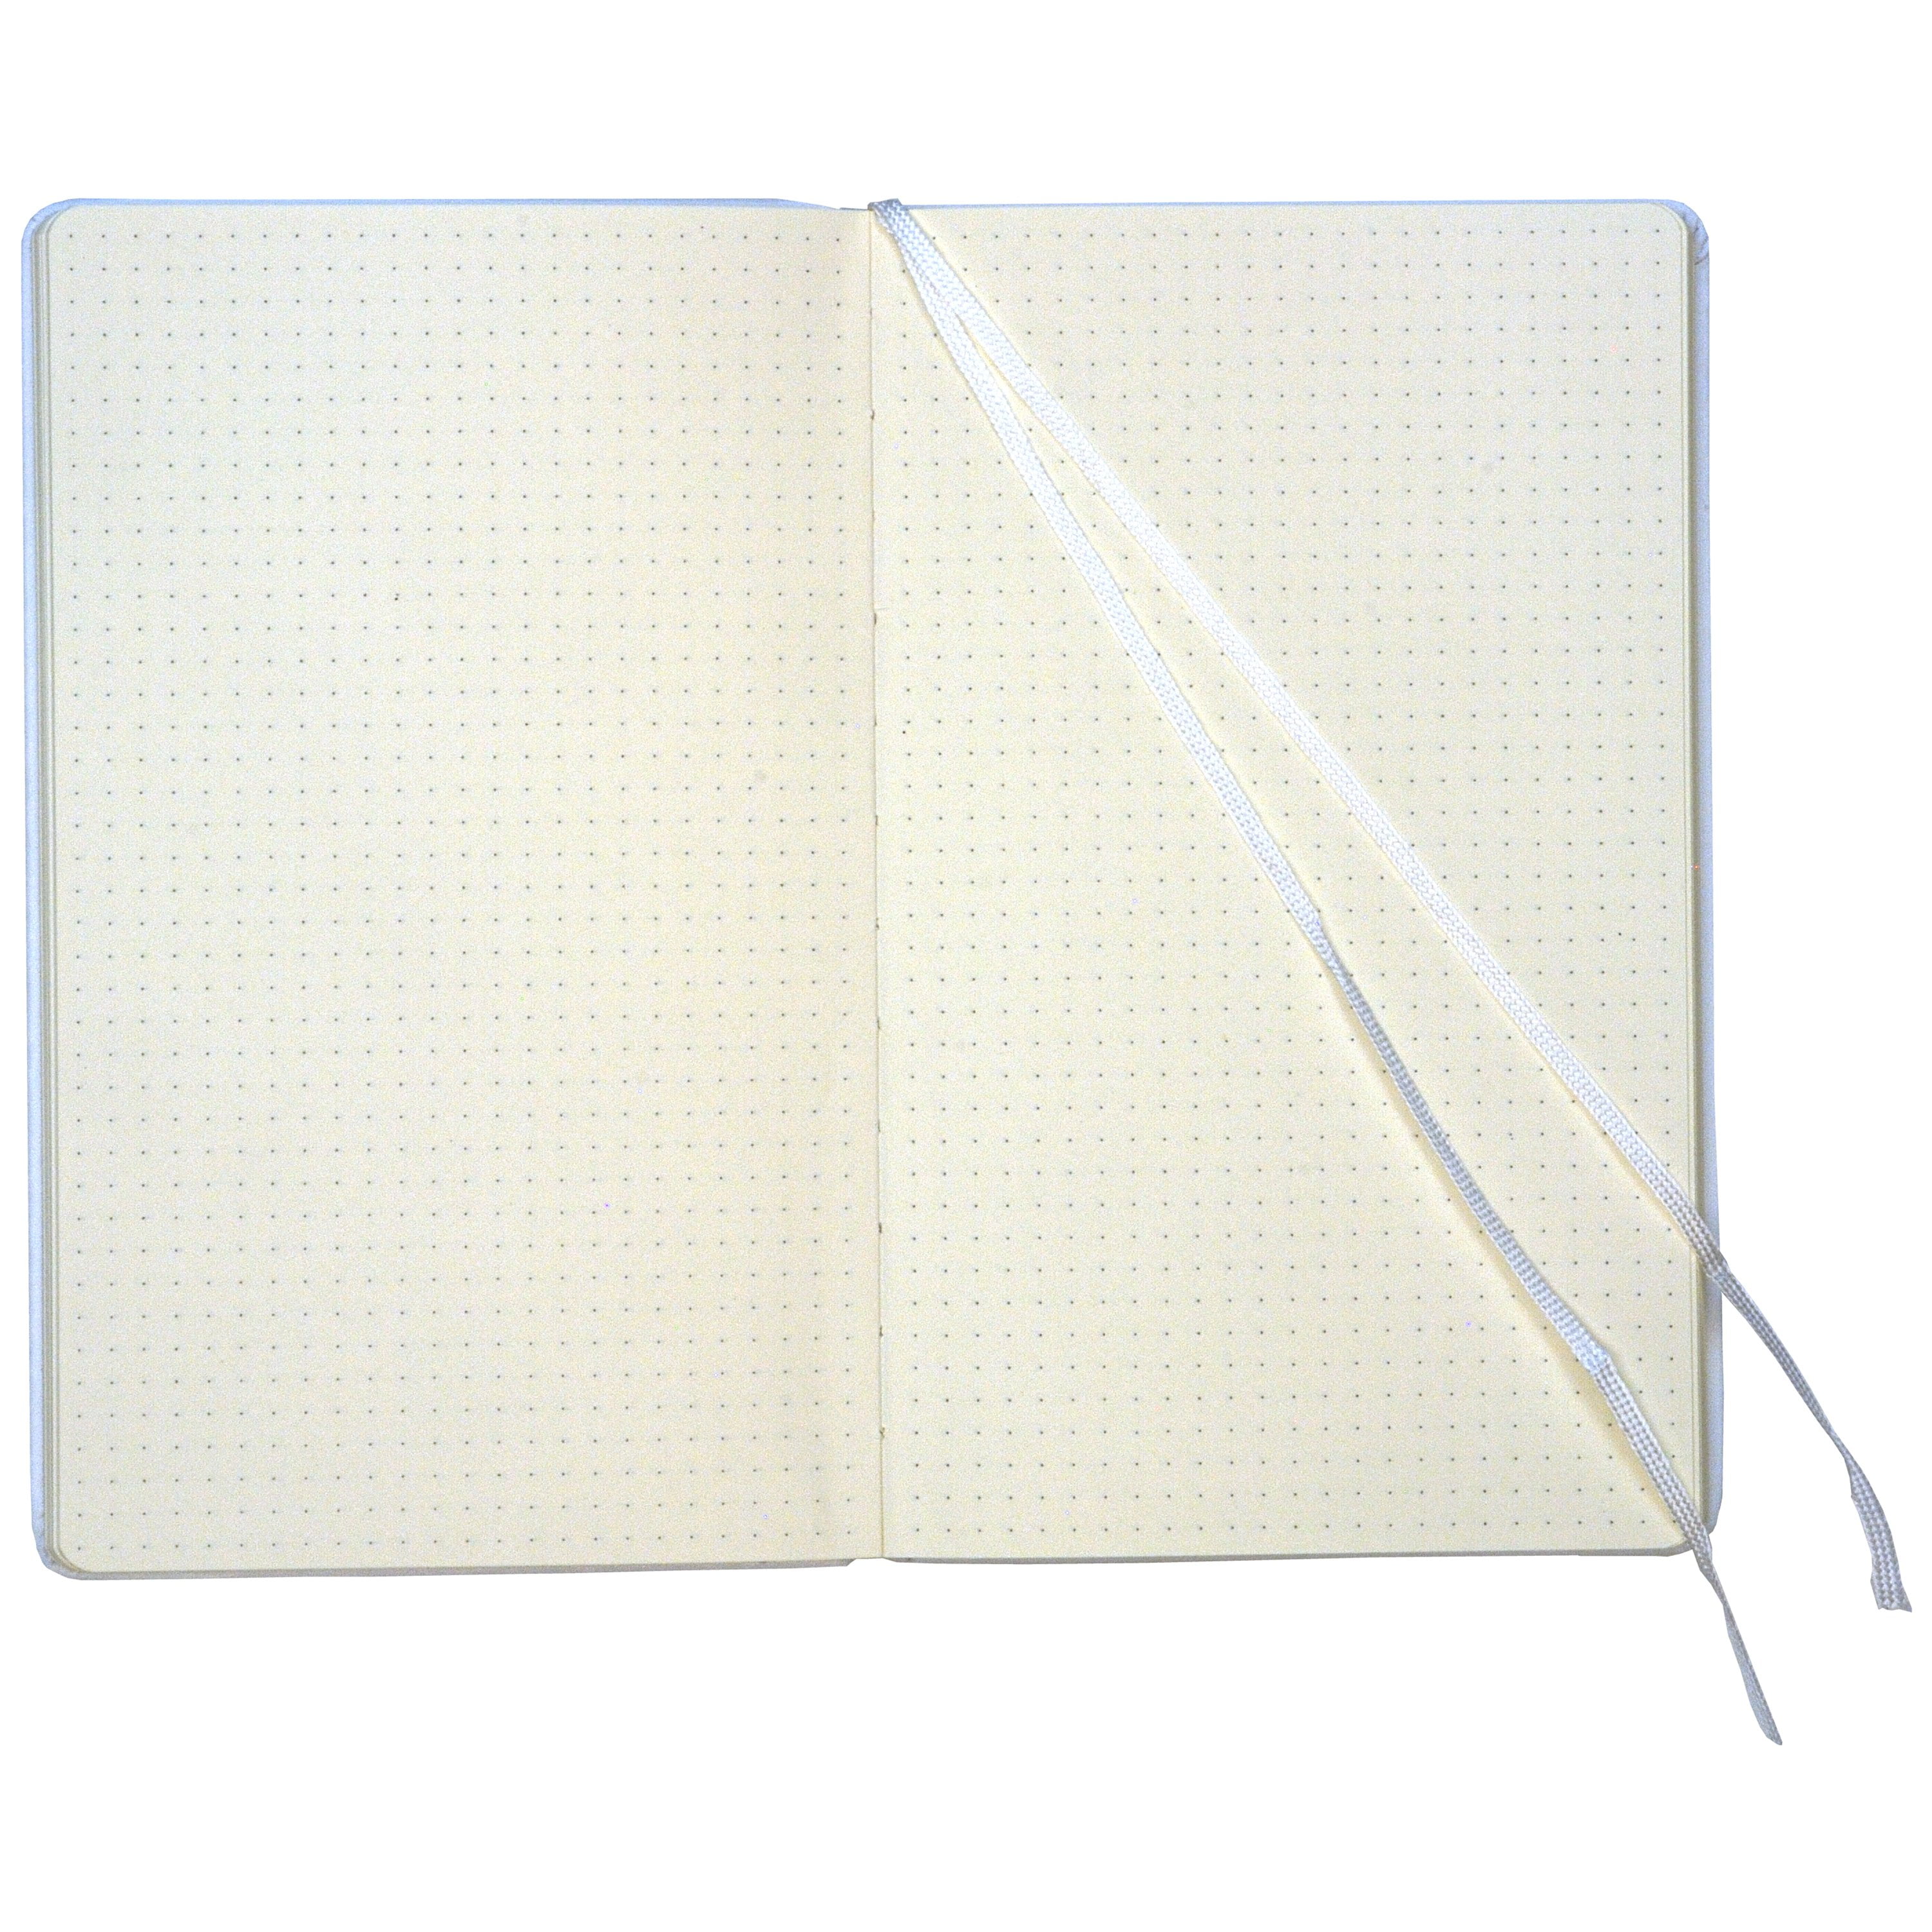 Dot Grid Notebook: Dotted Grid Journal - 150 Pages - Large Dotted Paper  Book - 8.5 x 11 - Black and White Cover by Mr. Linwood's Bookstore